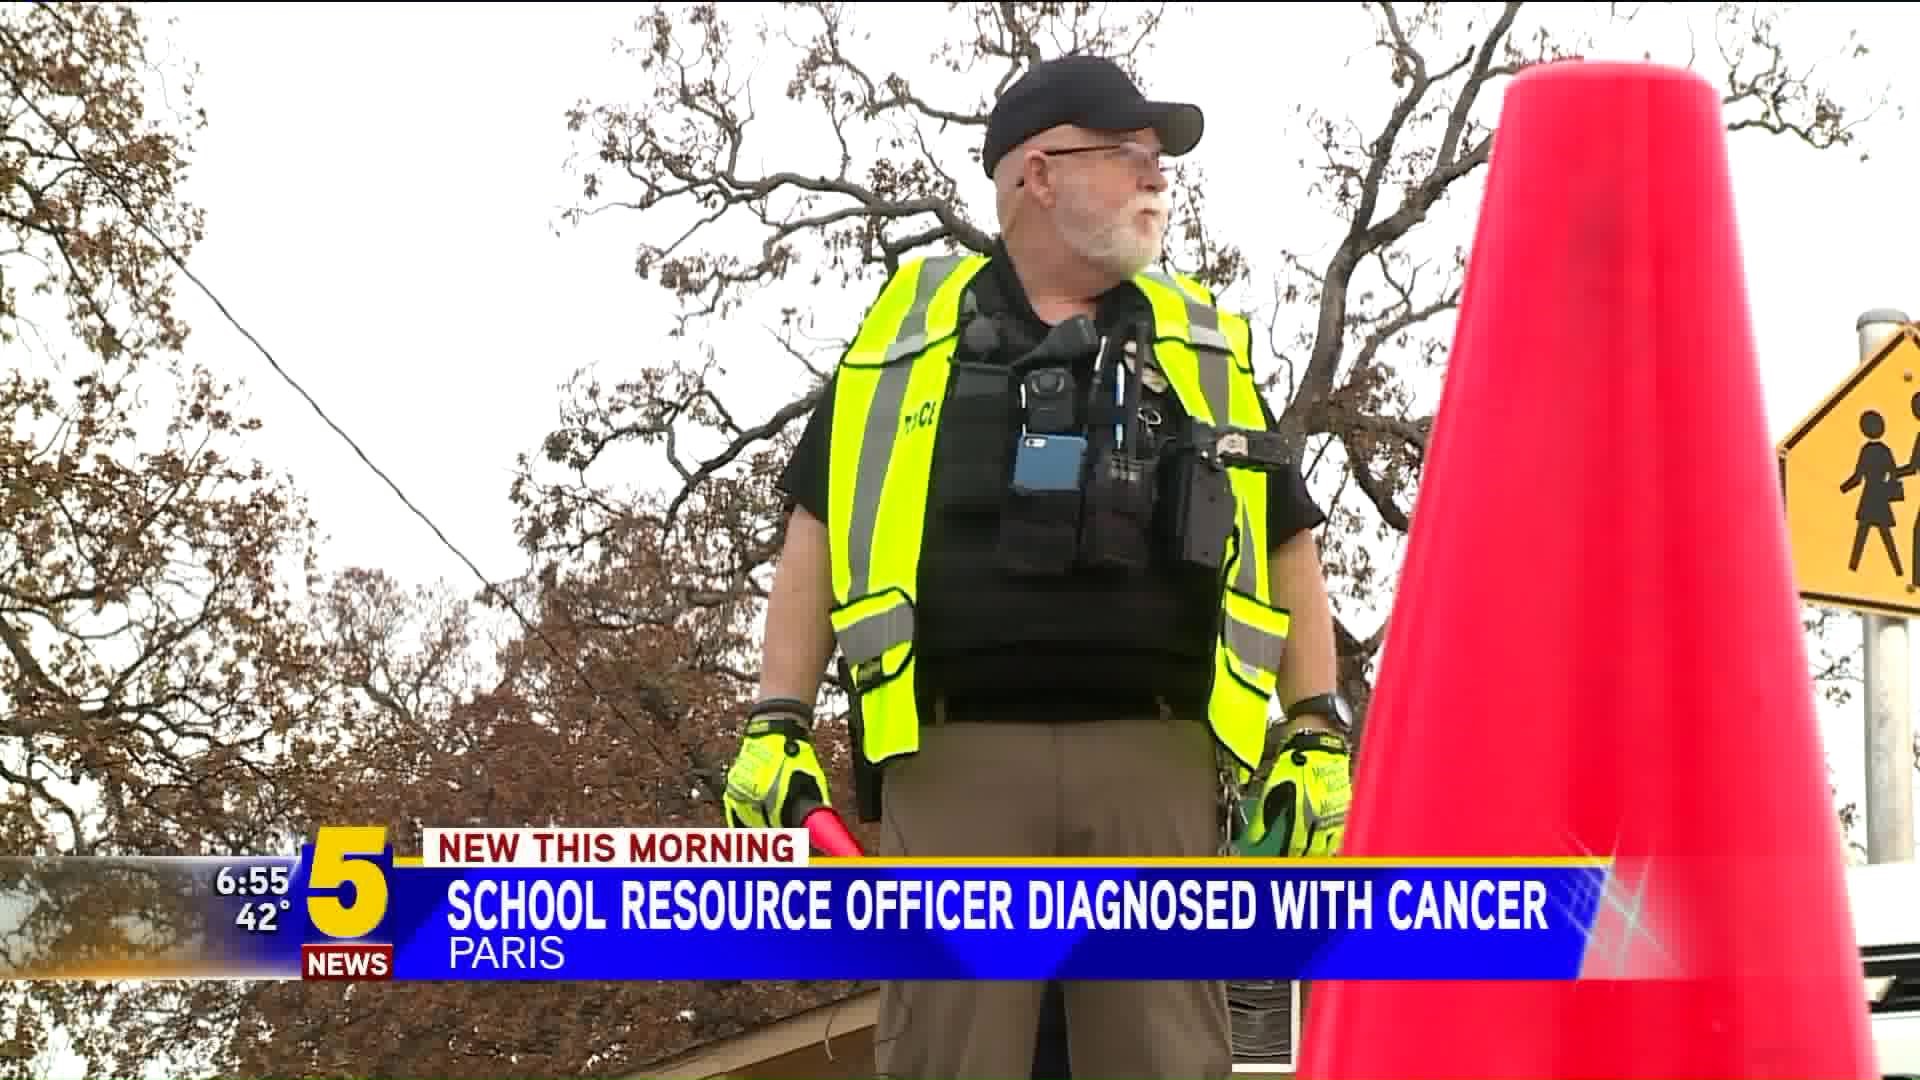 School Resource Officer Diagnosed With Cancer